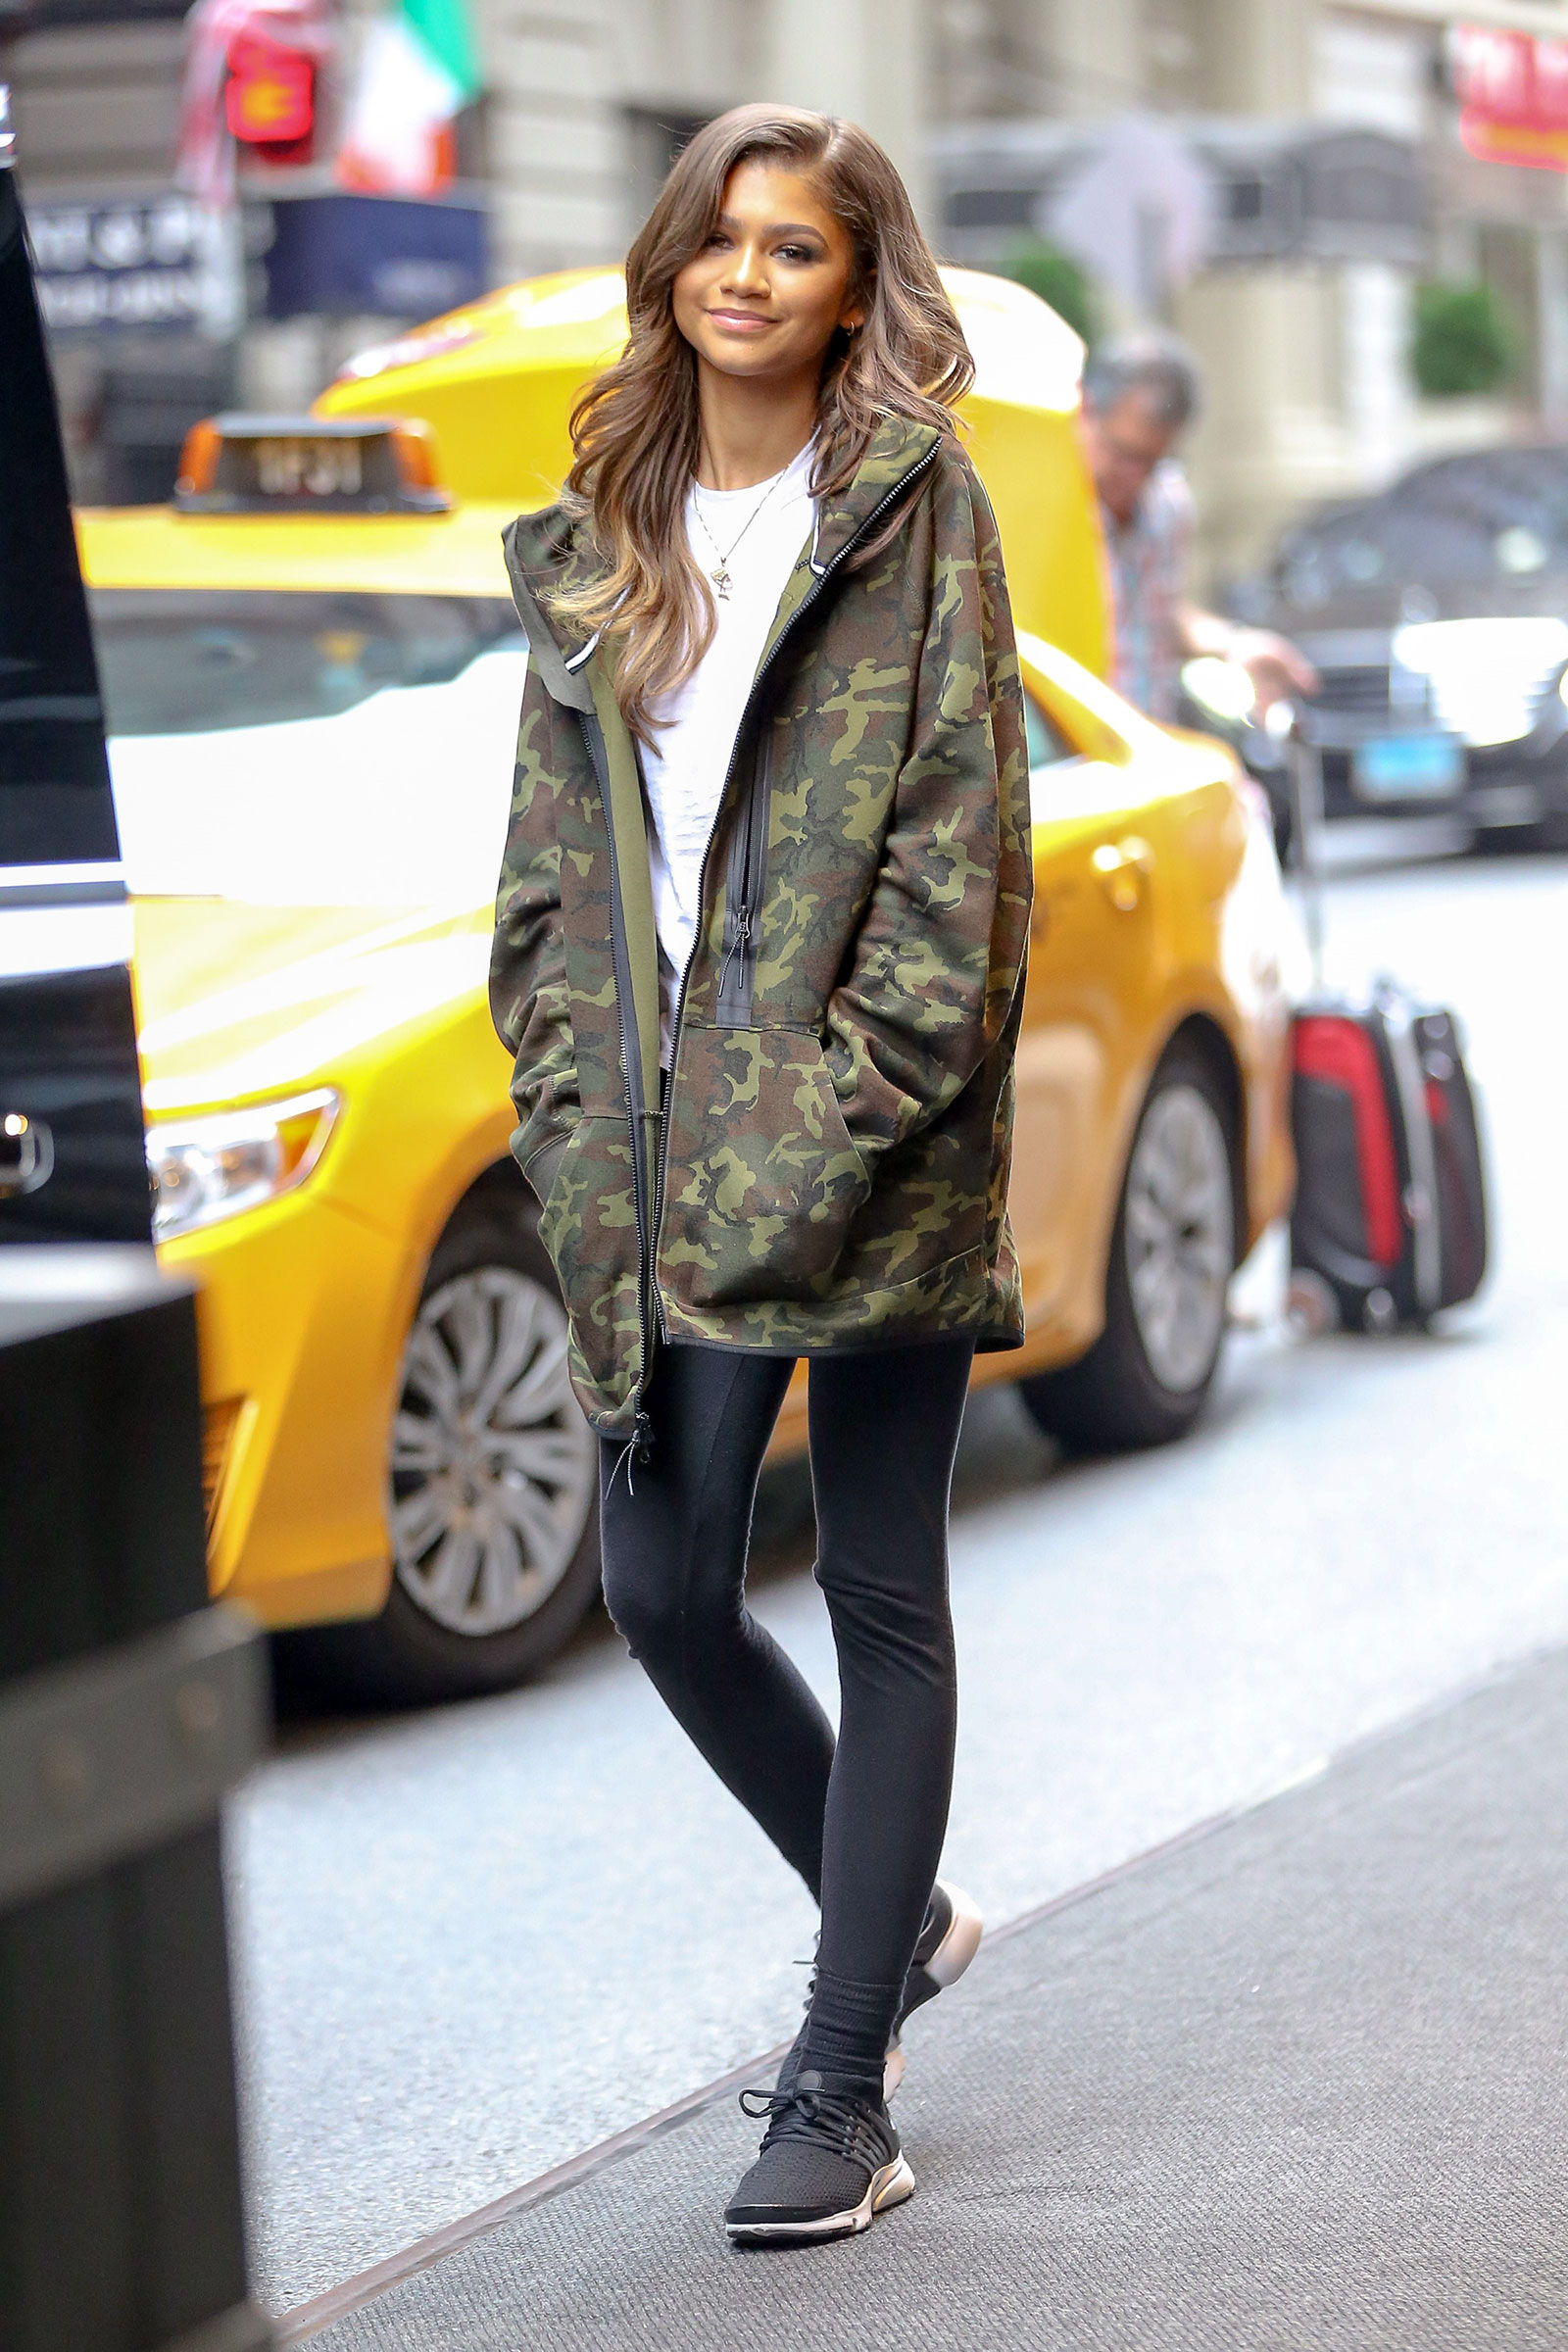 Zendaya styles her camo jacket with leggings, sneakers and soft curls.